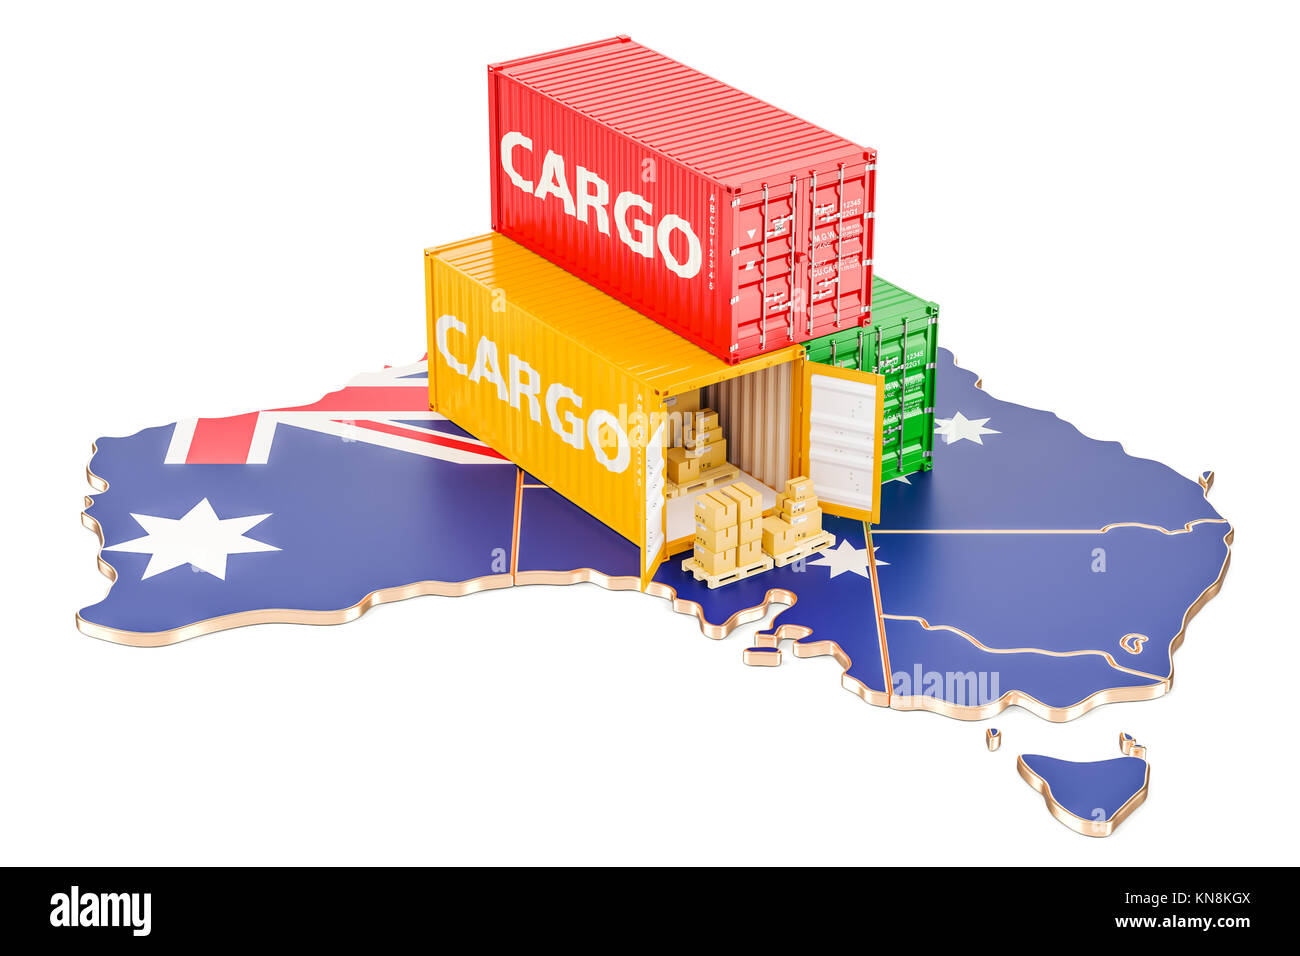 Cargo Shipping and Delivery from Australia isolated on white background Stock Photo